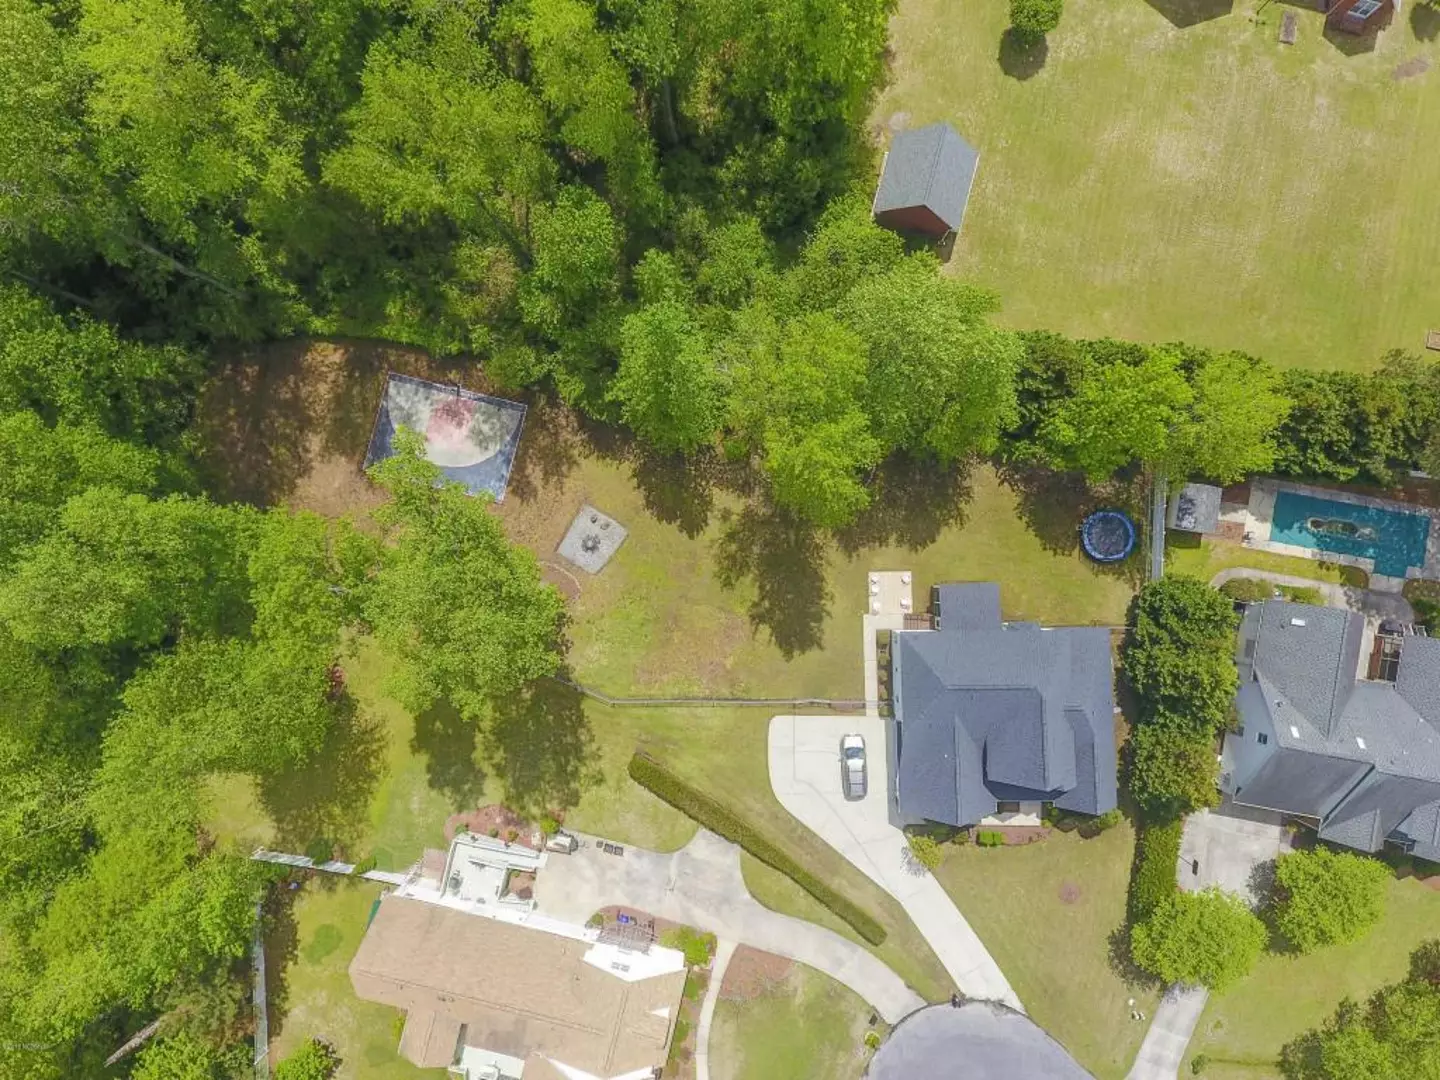 One of the homes MrBeast purchased in North Carolina.